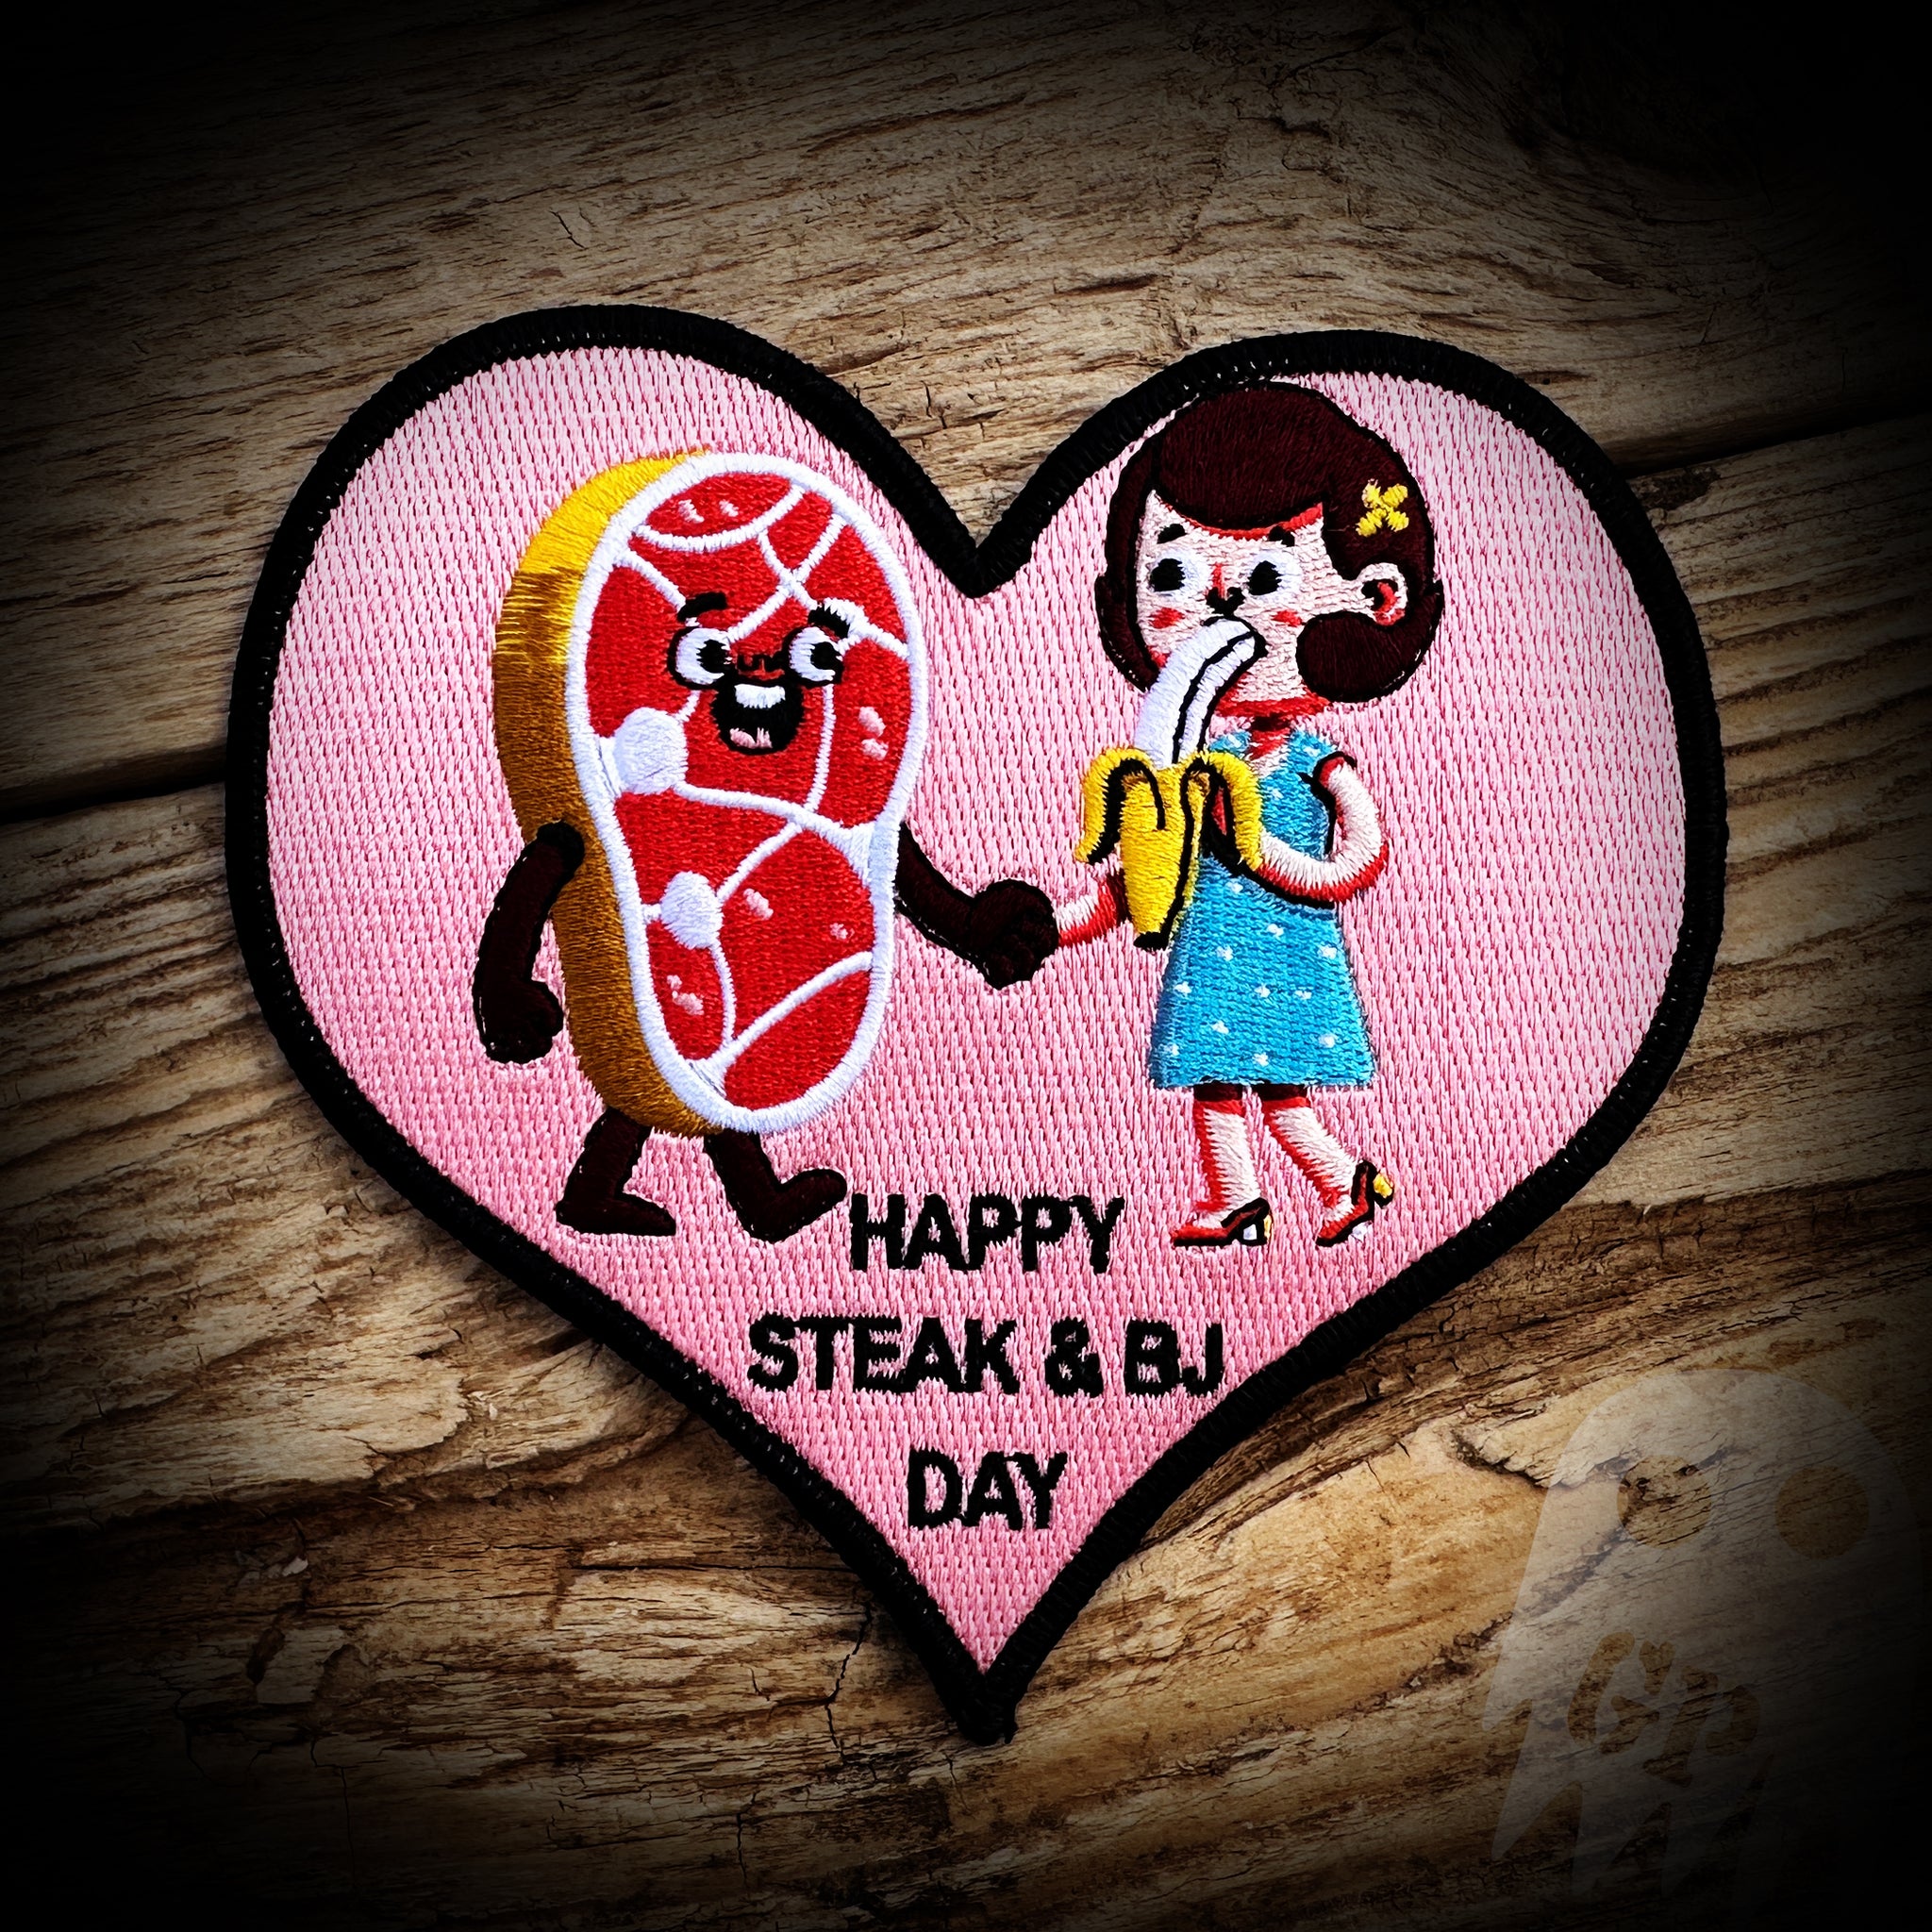 Steak and BJ Day Patch